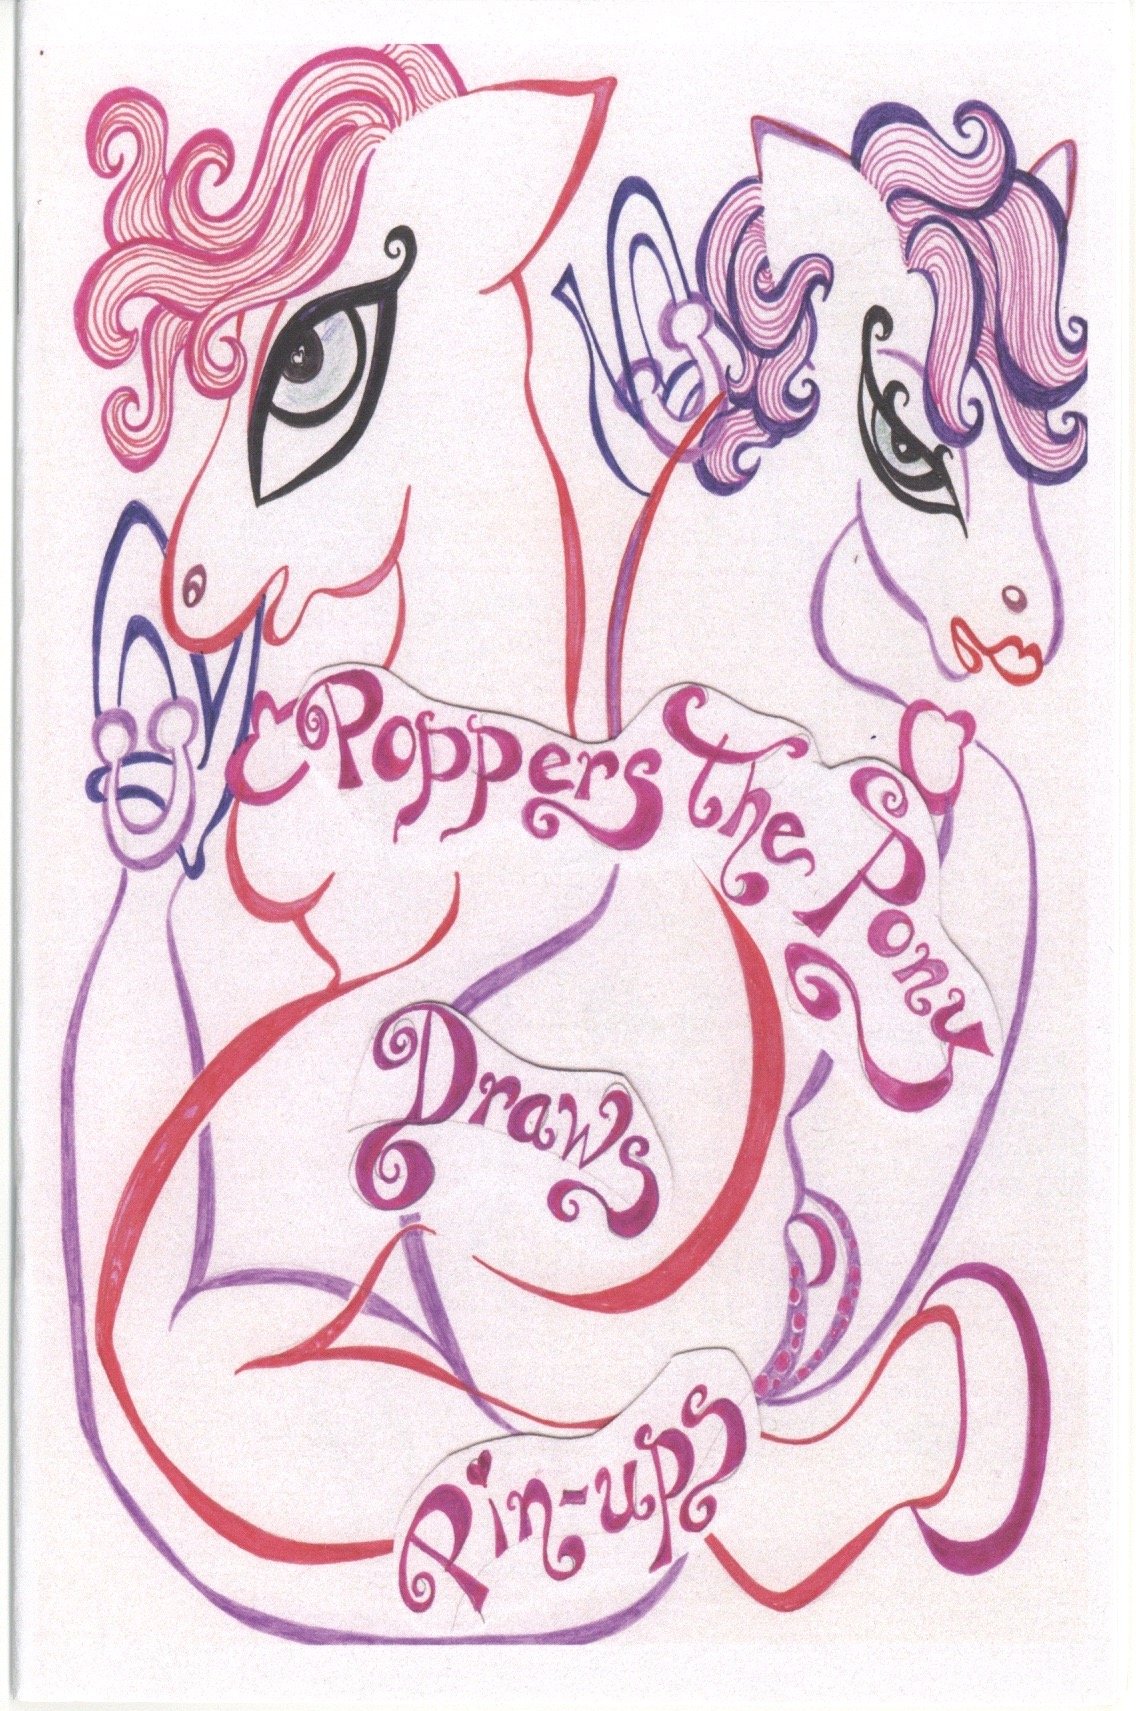 Image of Poppers the Pony Draws Pinups